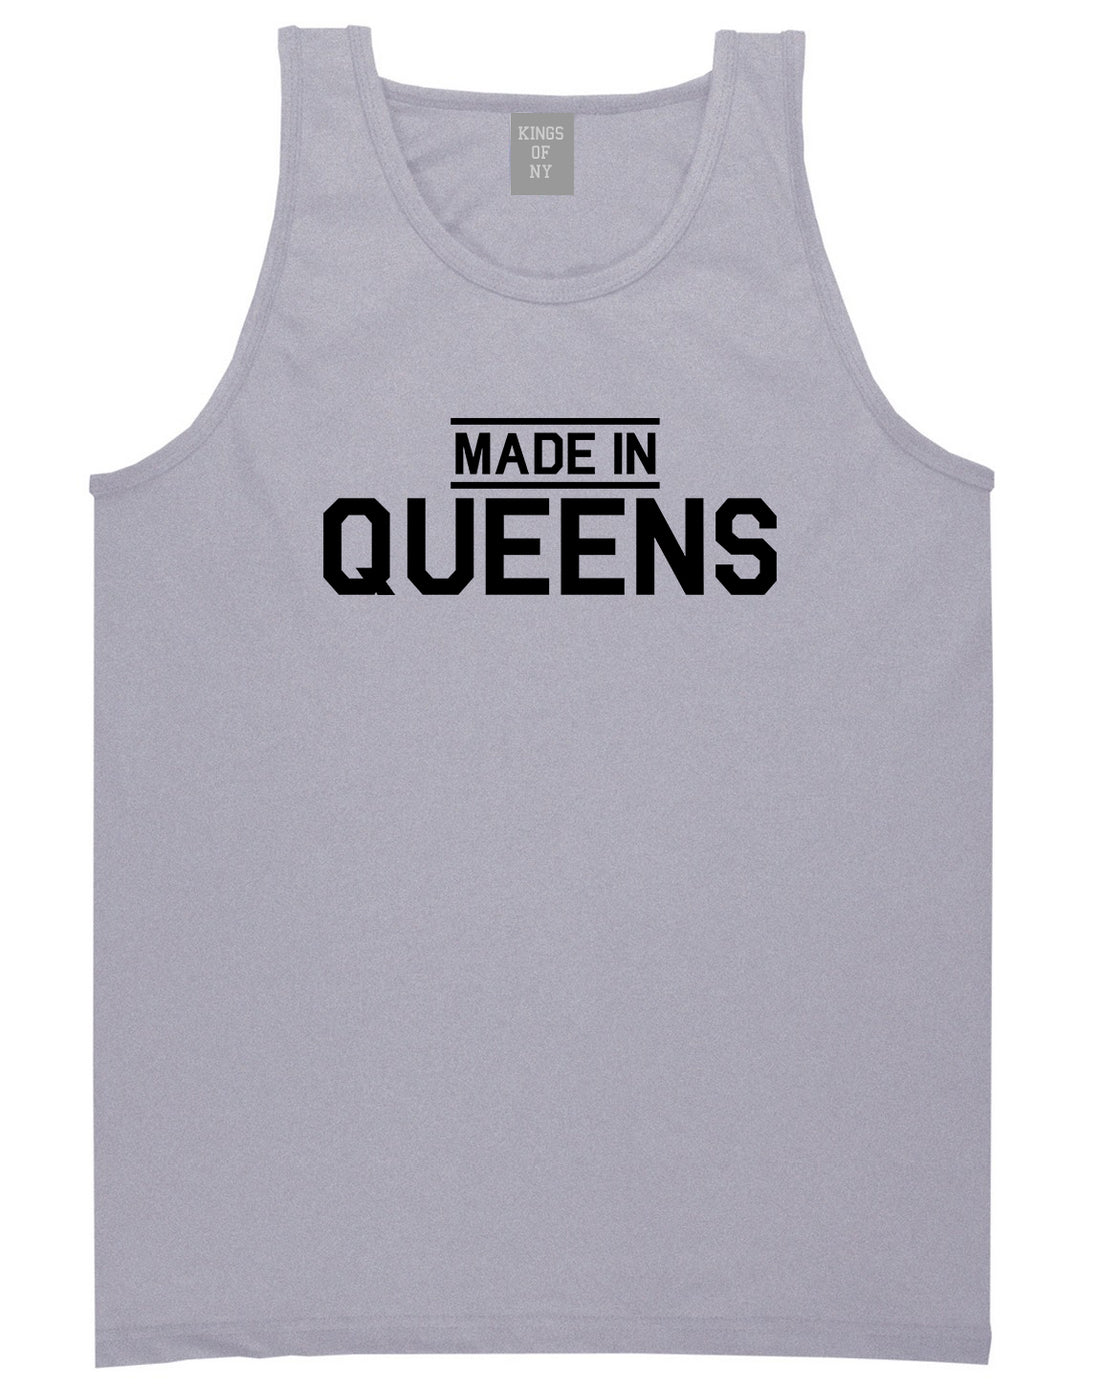 Made In Queens NY Mens Tank Top T-Shirt Grey